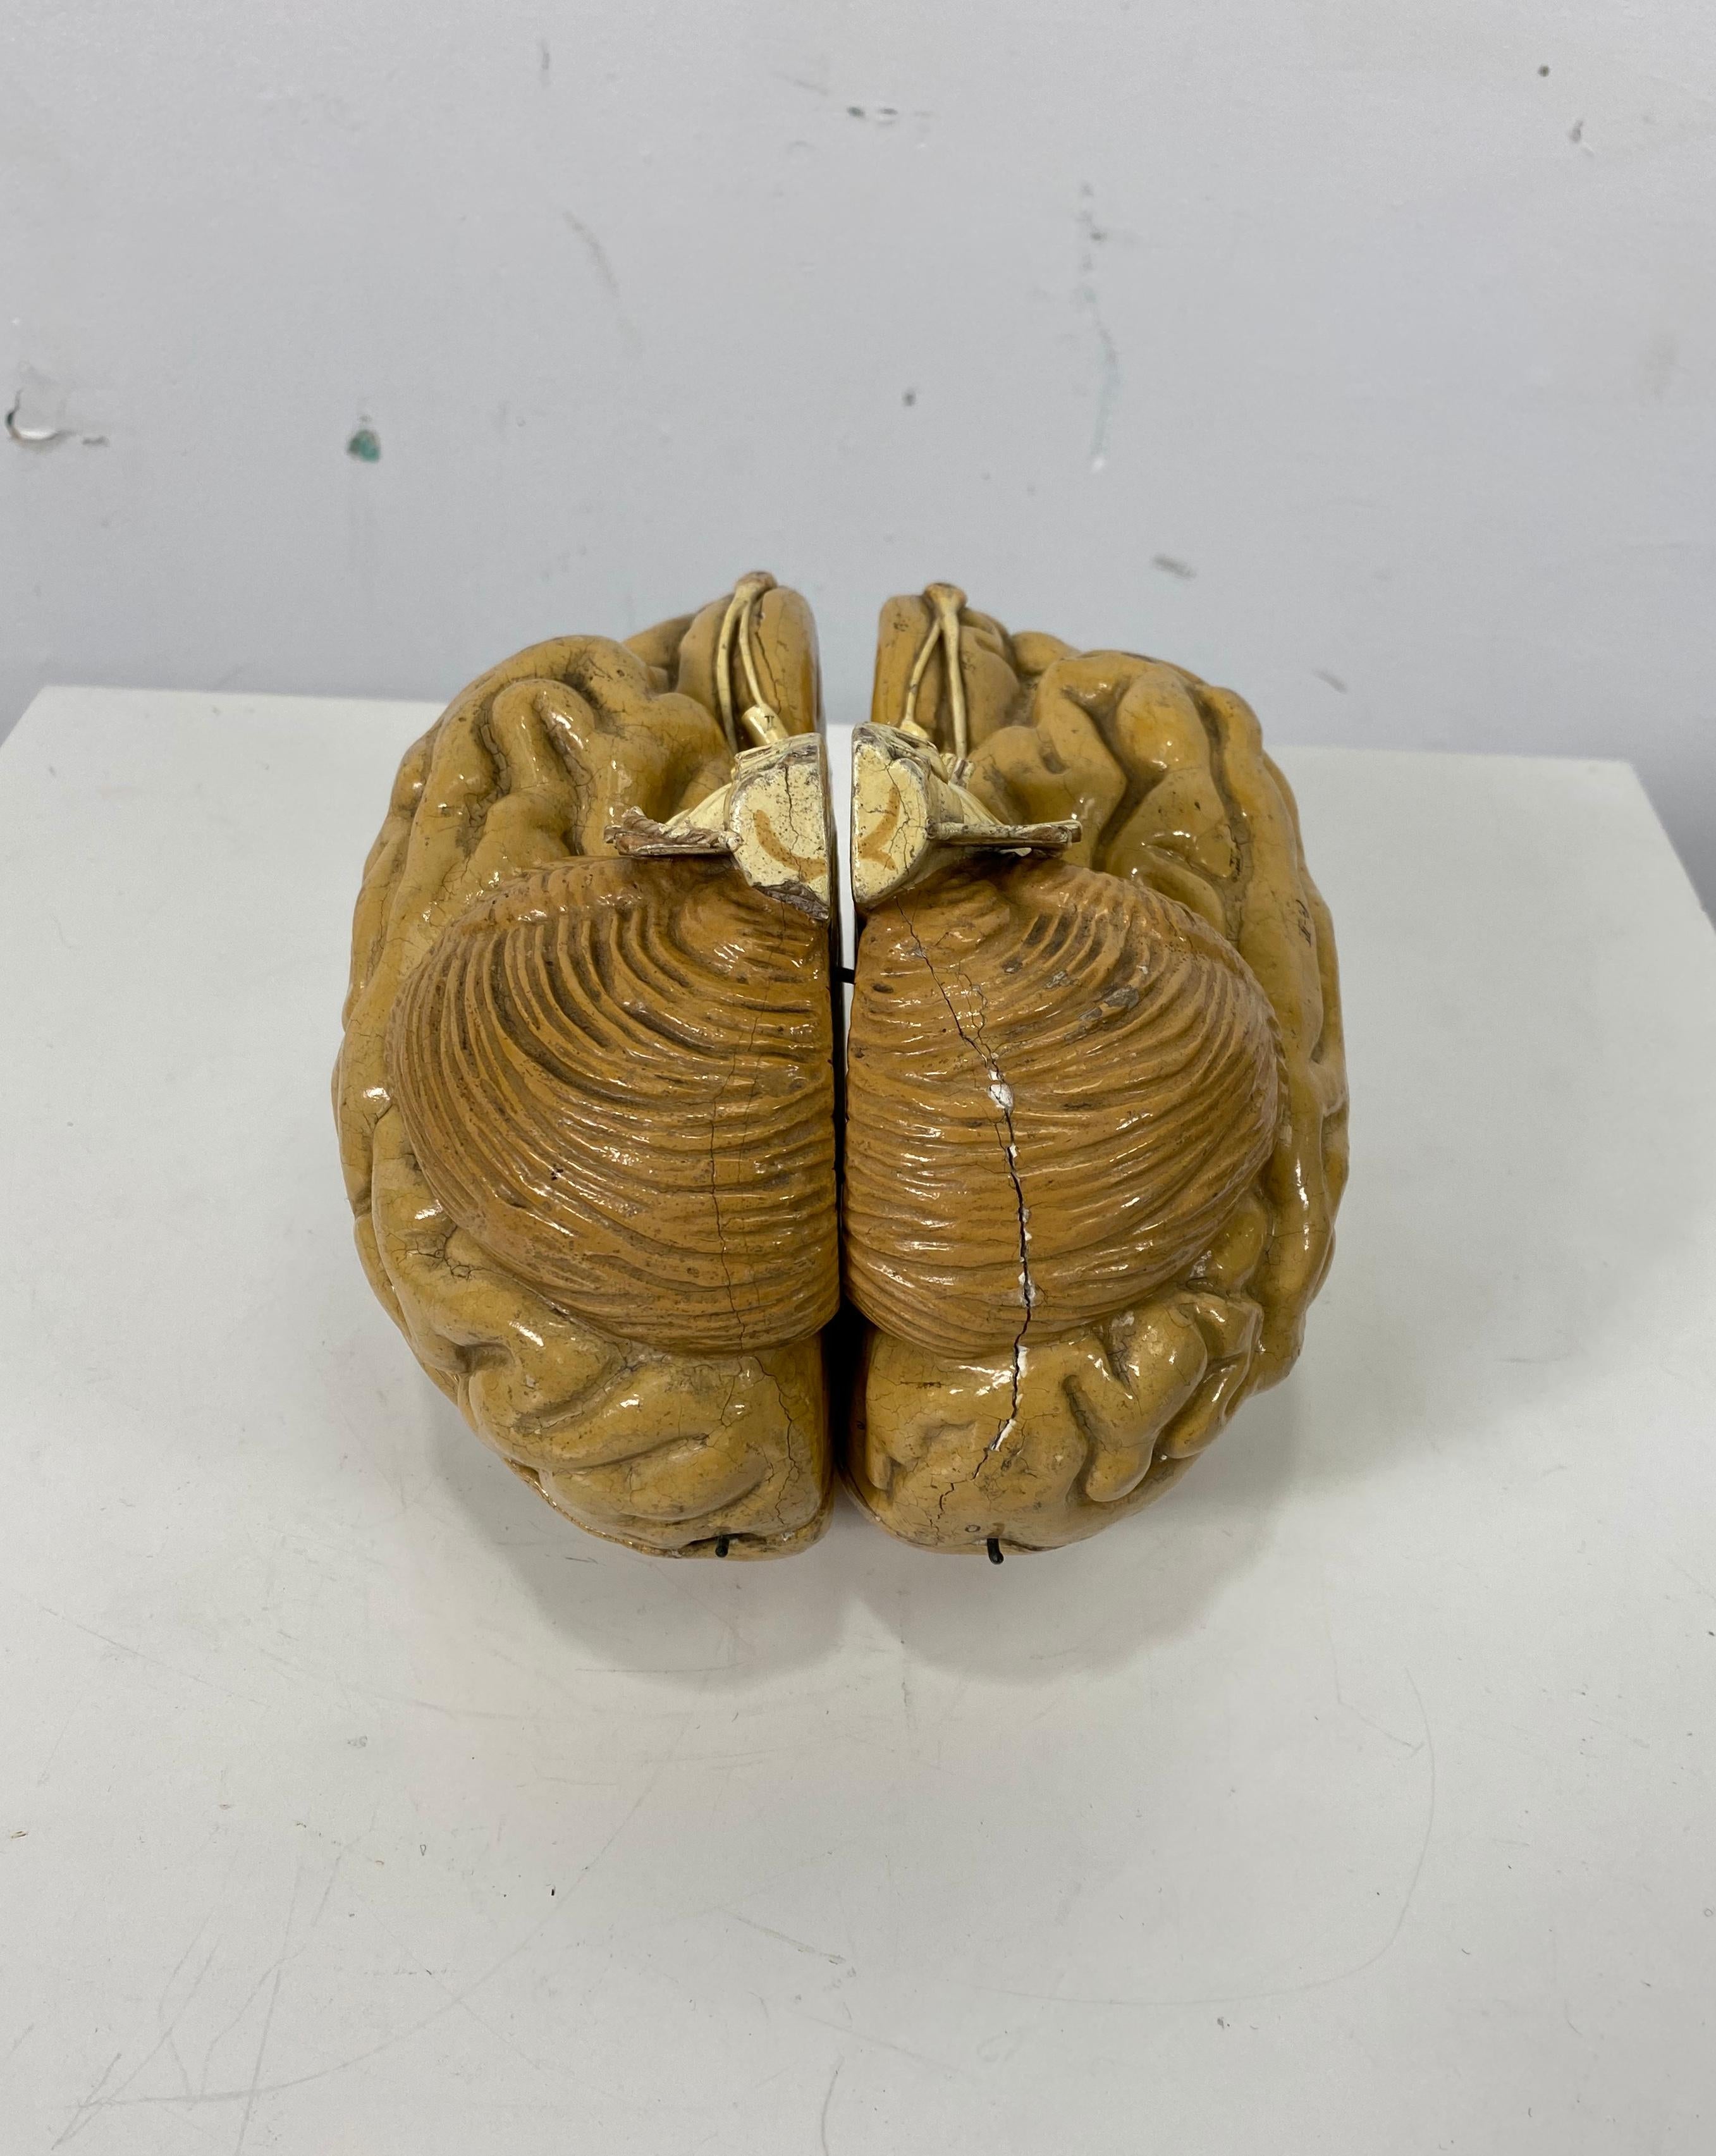 Early Didactic Model of a Human Brain, 4 Section, Plaster, Kovodelny Podnik 1